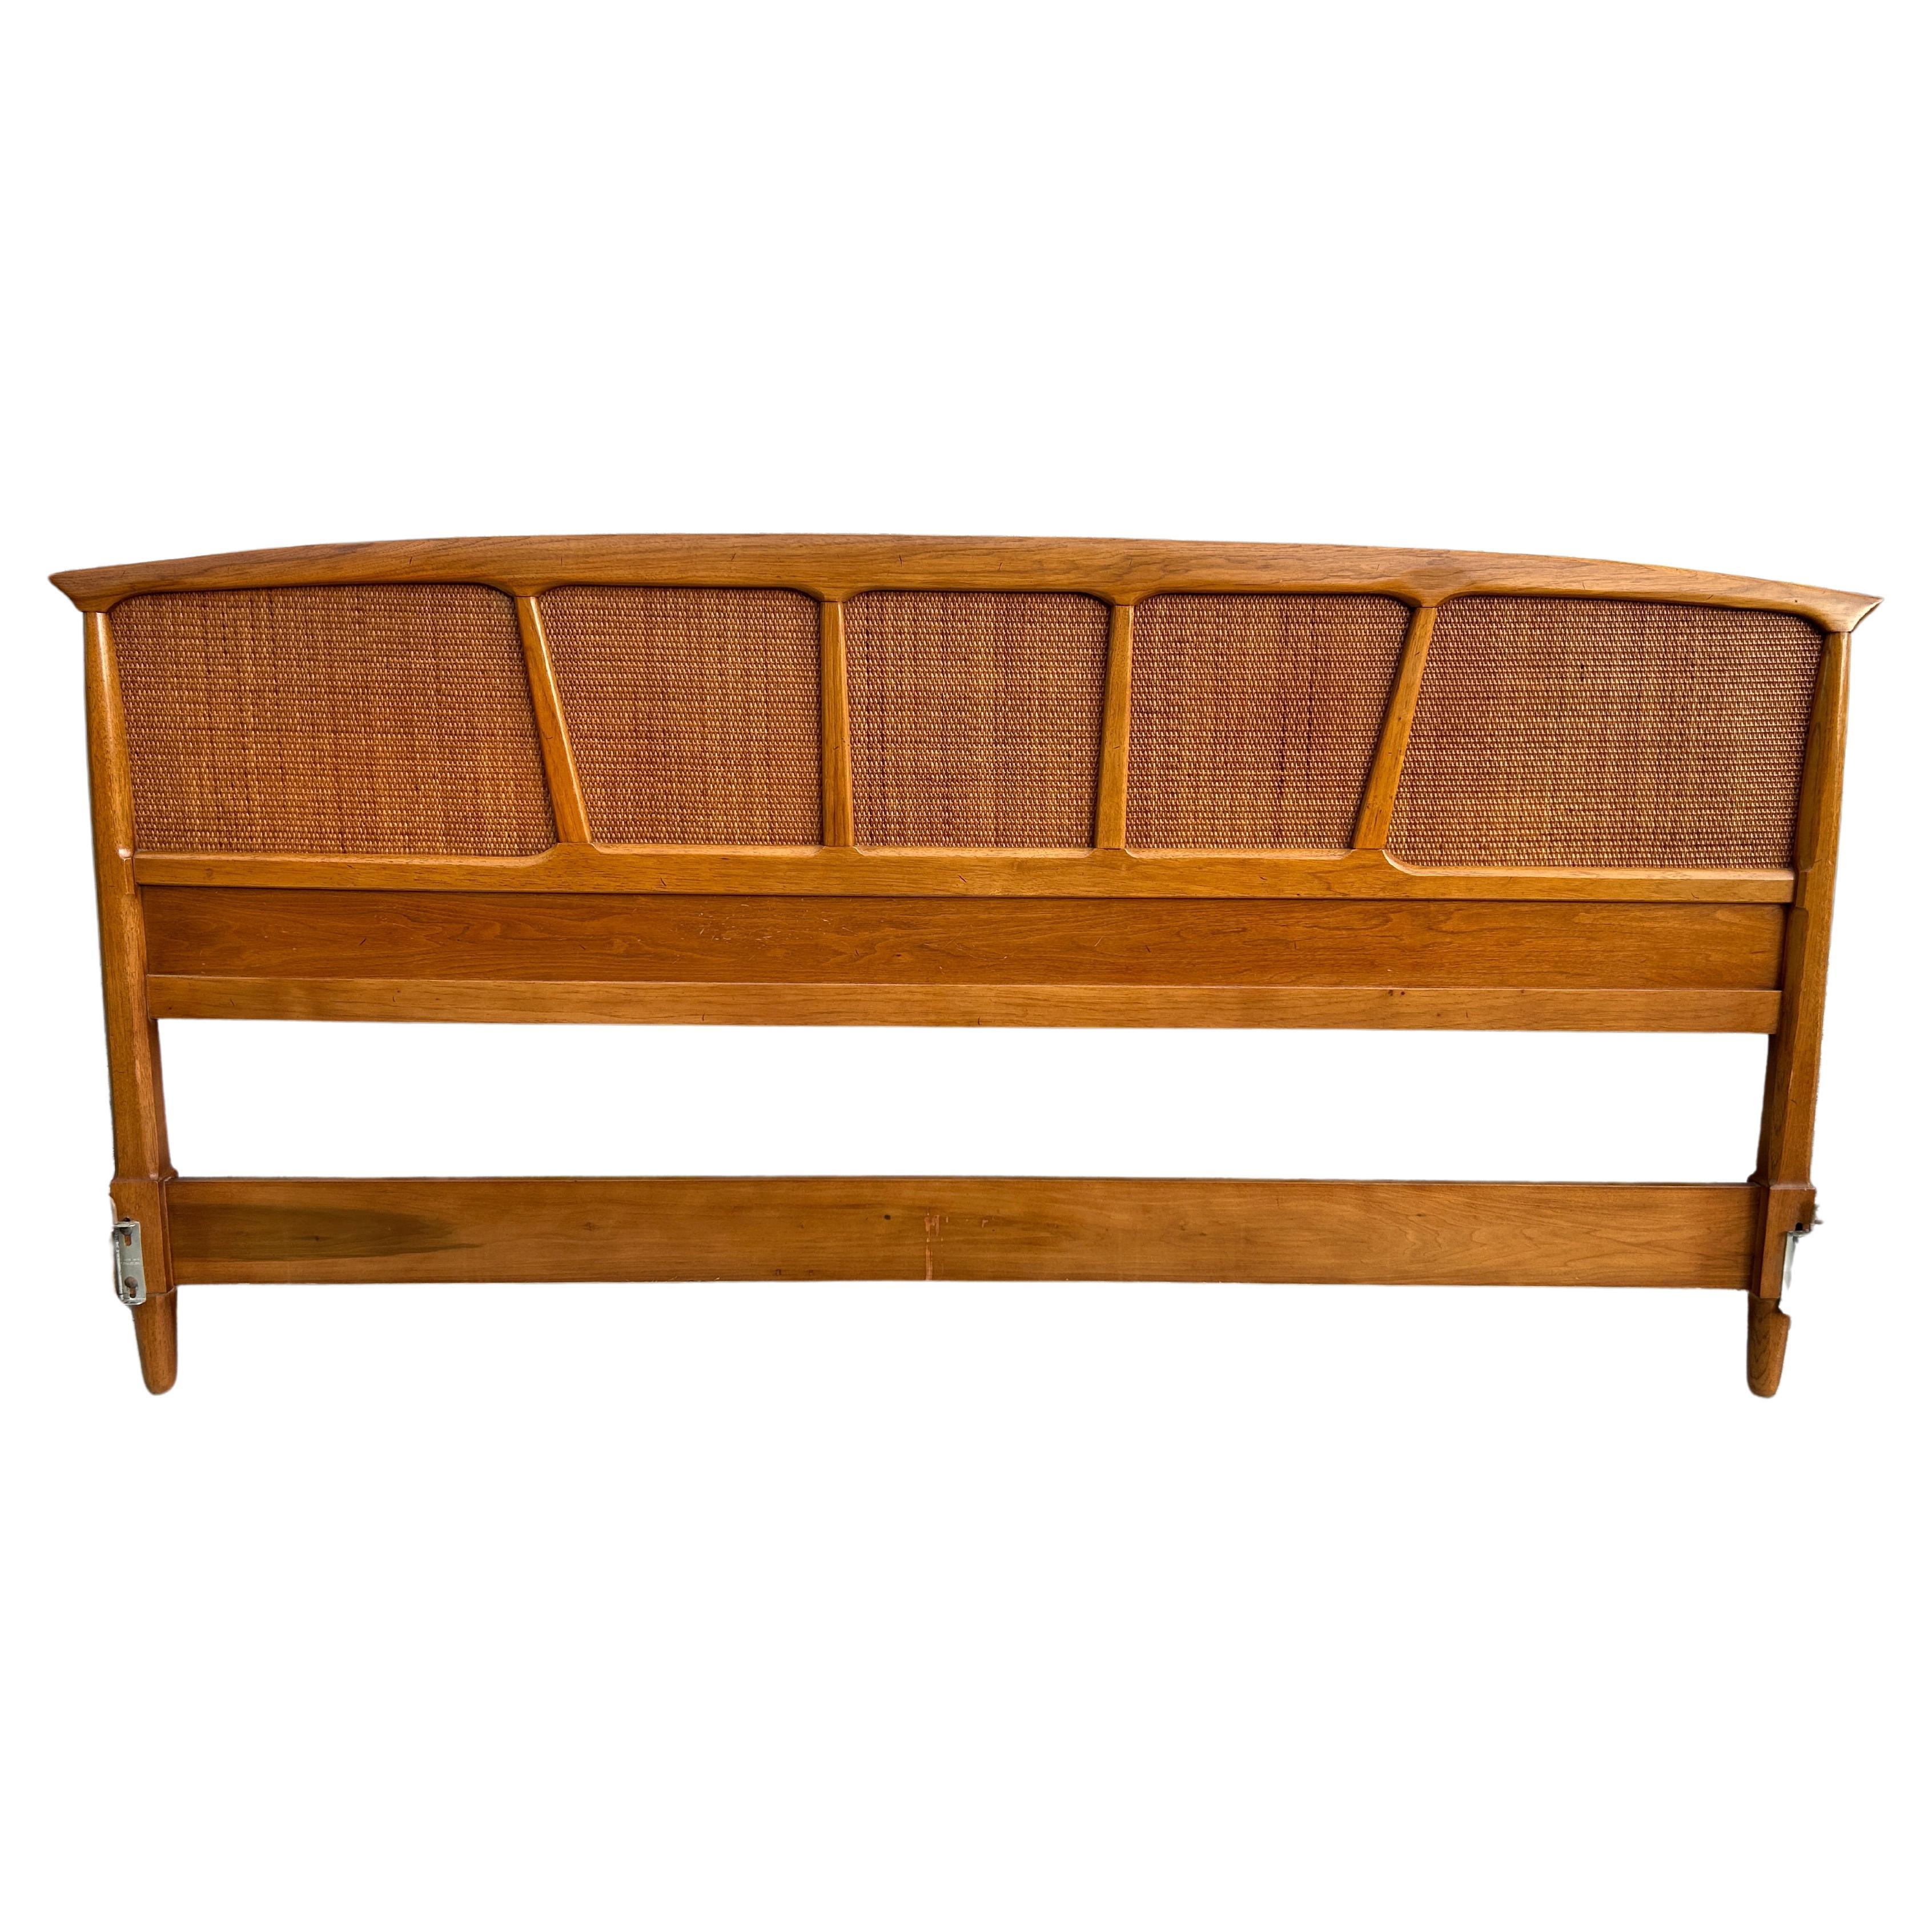 Beautiful walnut sculpted cane King size bed headboard by Tomlinson For Sale